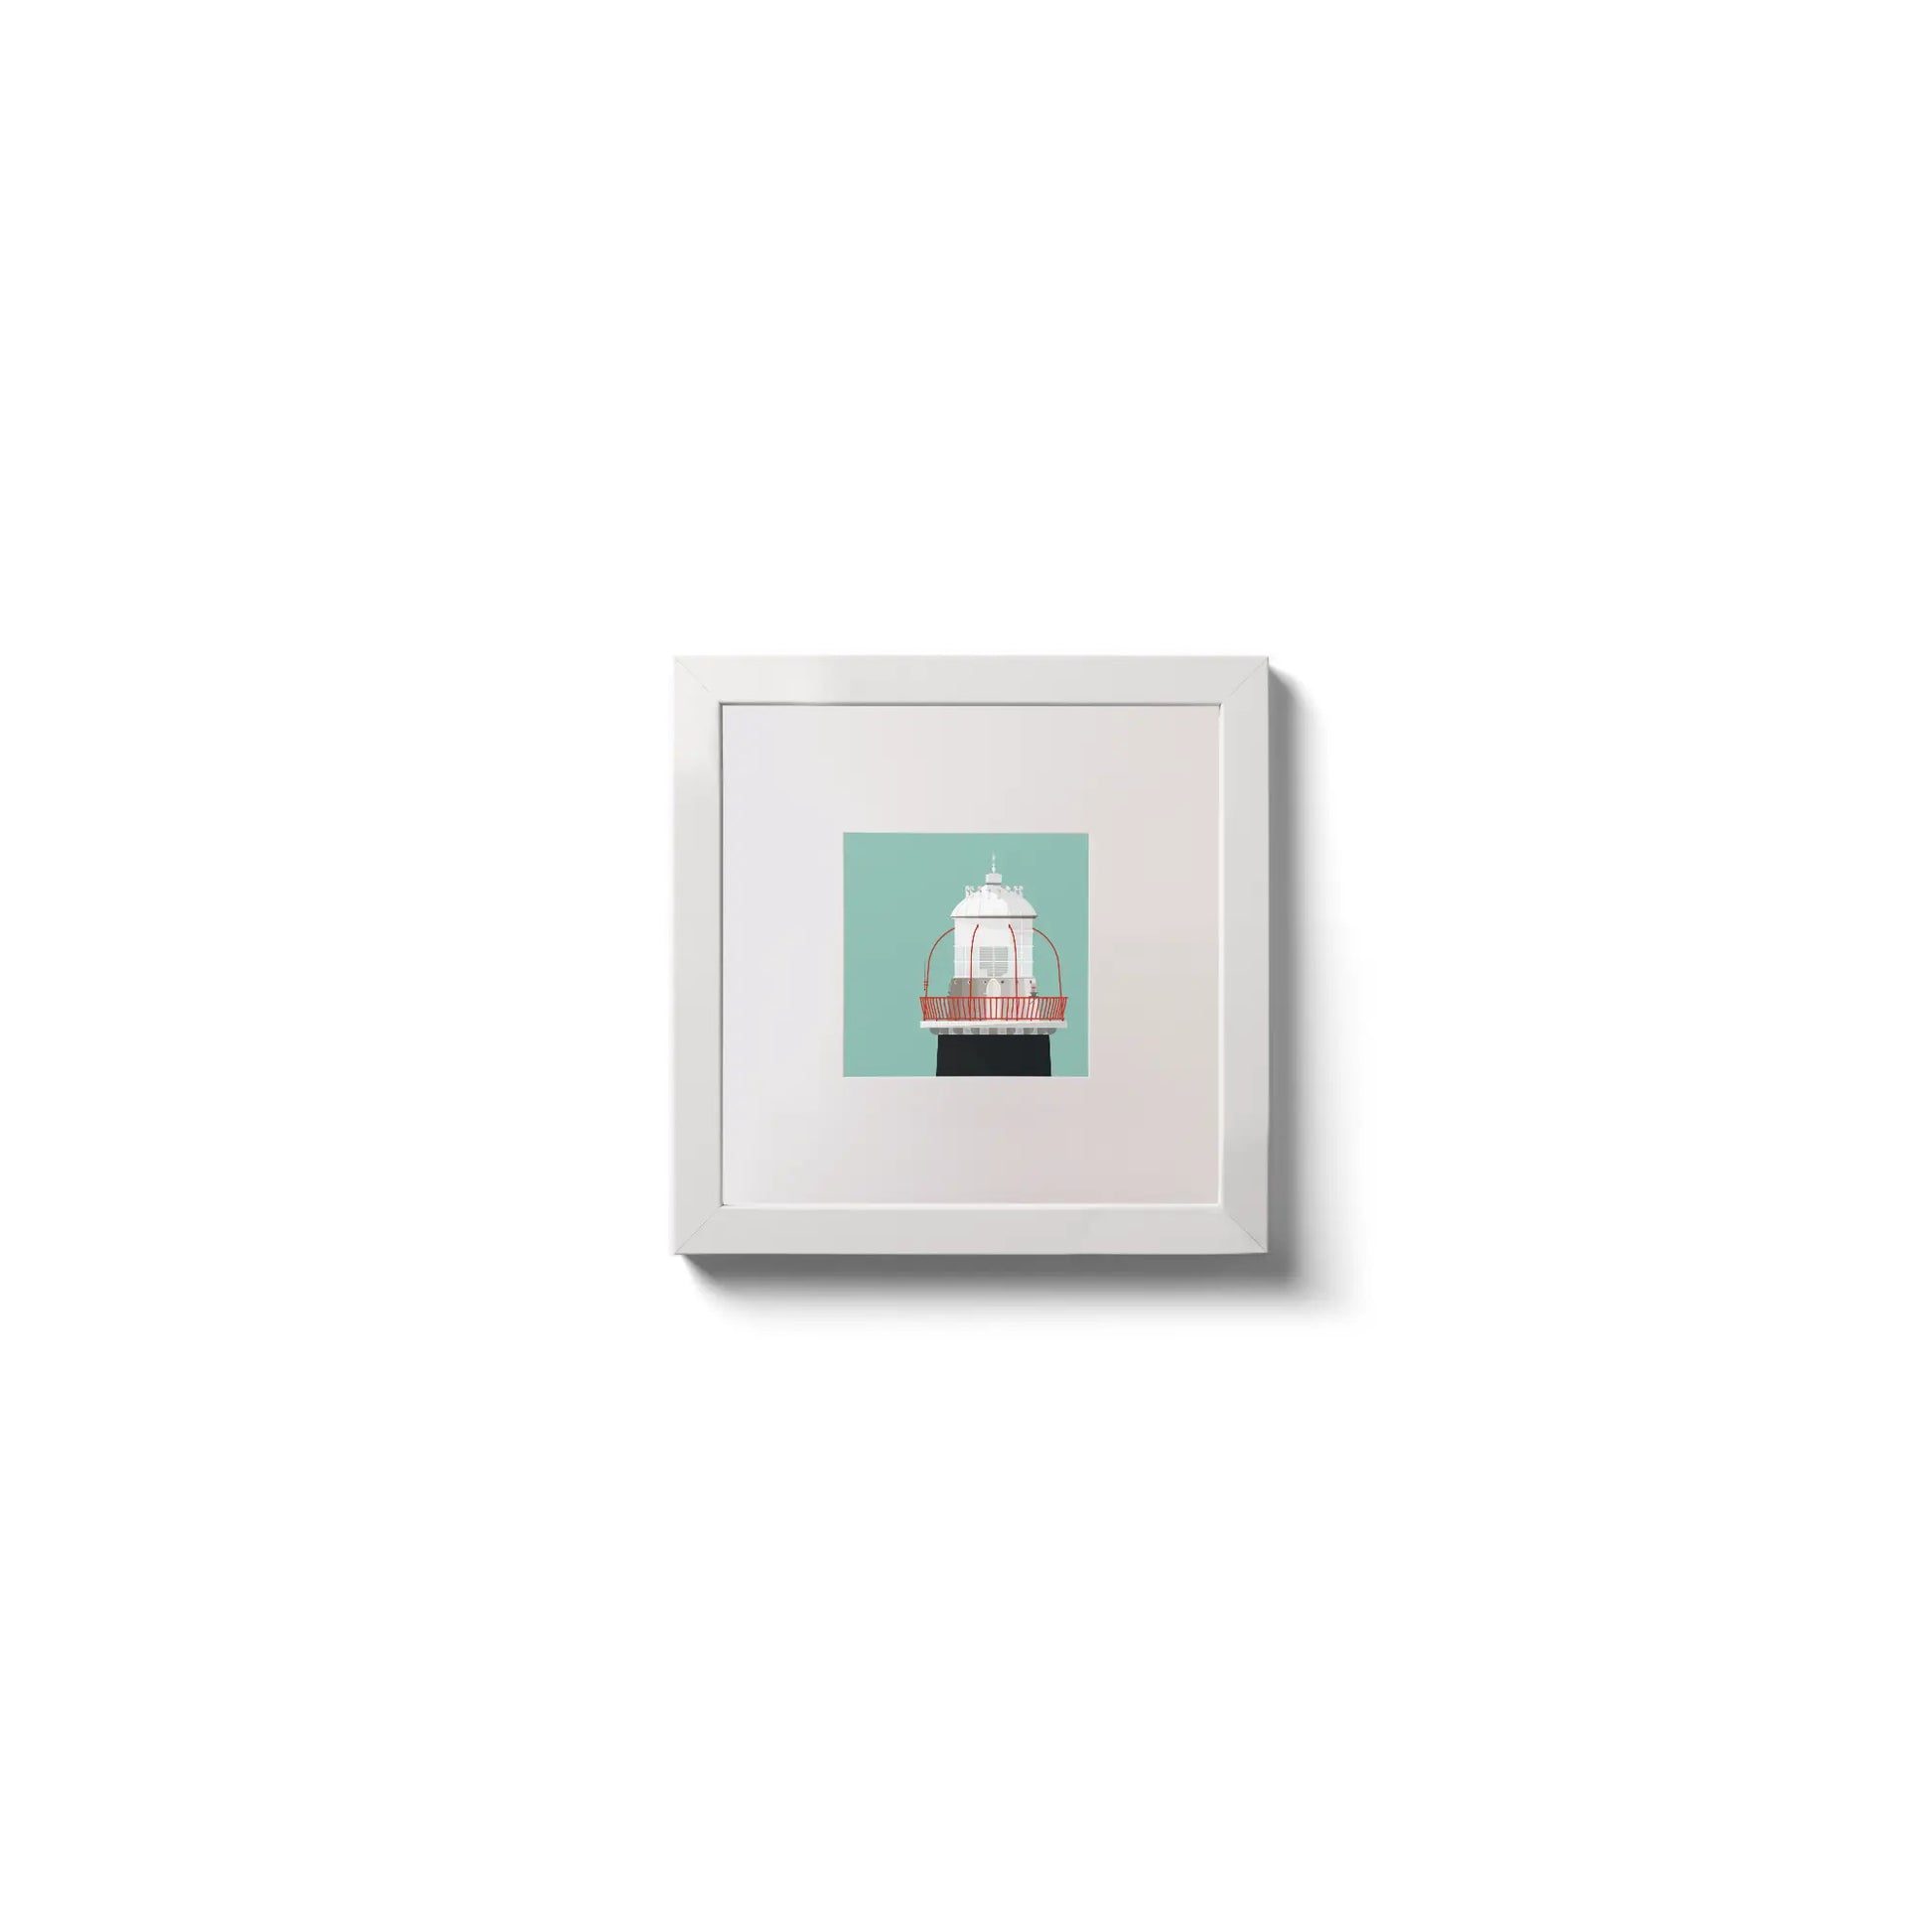 Illustration of Roancarrigmore lighthouse on an ocean green background,  in a white square frame measuring 10x10cm.